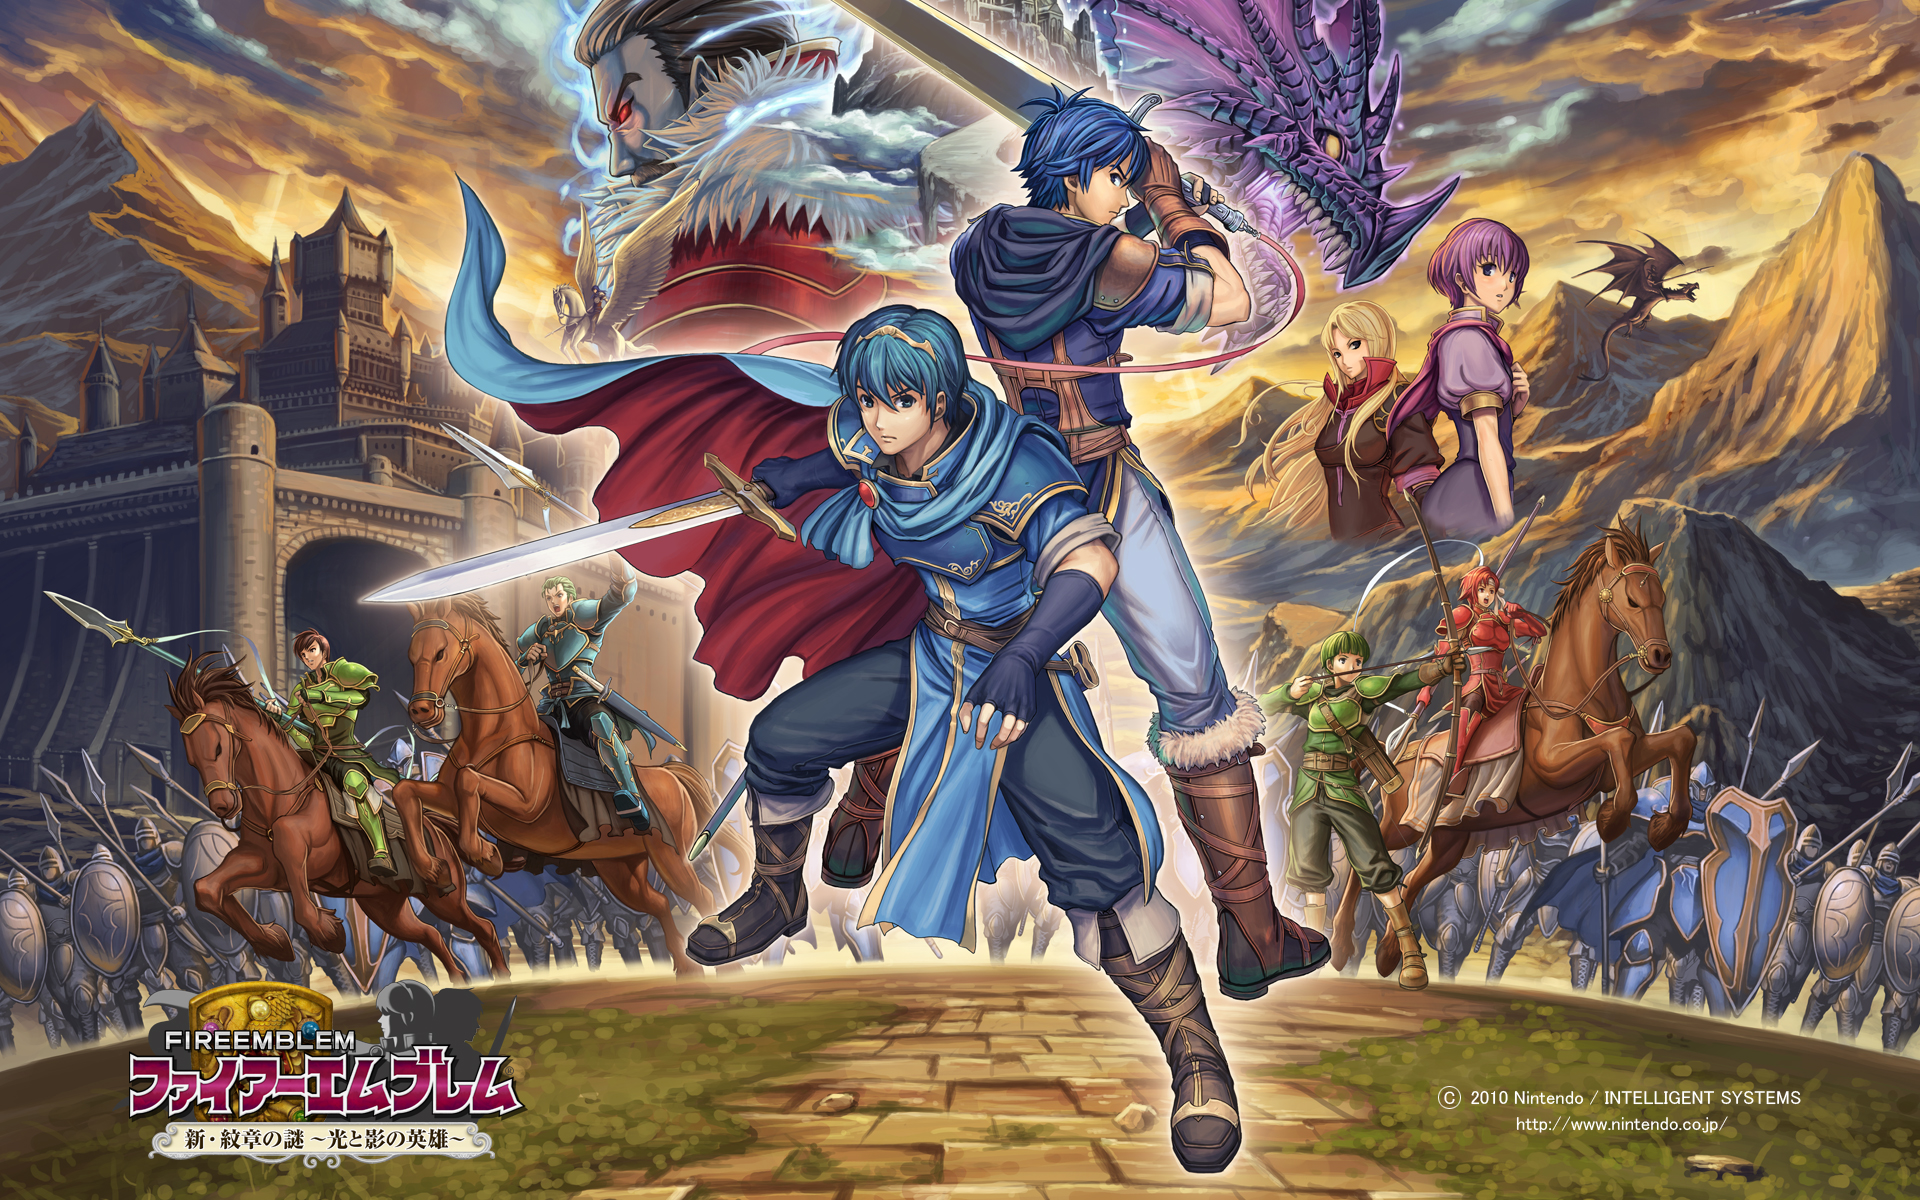 Promotional art for the game. The same image of Marth and Kris from the cover is superimposed in the center: the rest of the image is a more colorful and larger version of the background image from the cover, where the knights extend in either direction in front of a castle and mountains. On the left side are two horsemen in green and blue; on the right, a horsewoman in red and an archer in green. Superimposed on the mountains to the right are two women from the knees up: Katarina, a girl with short purple hair in a purple outfit; and Clarisse, a woman with long blonde hair in a brown outfit with a high collar. In the lower left is the game's title over the Fire Emblem; in the lower right is copyright information ((C) 2010 Nintendo / INTELLIGENT SYSTEMS https://www.nintendo.co.jp)